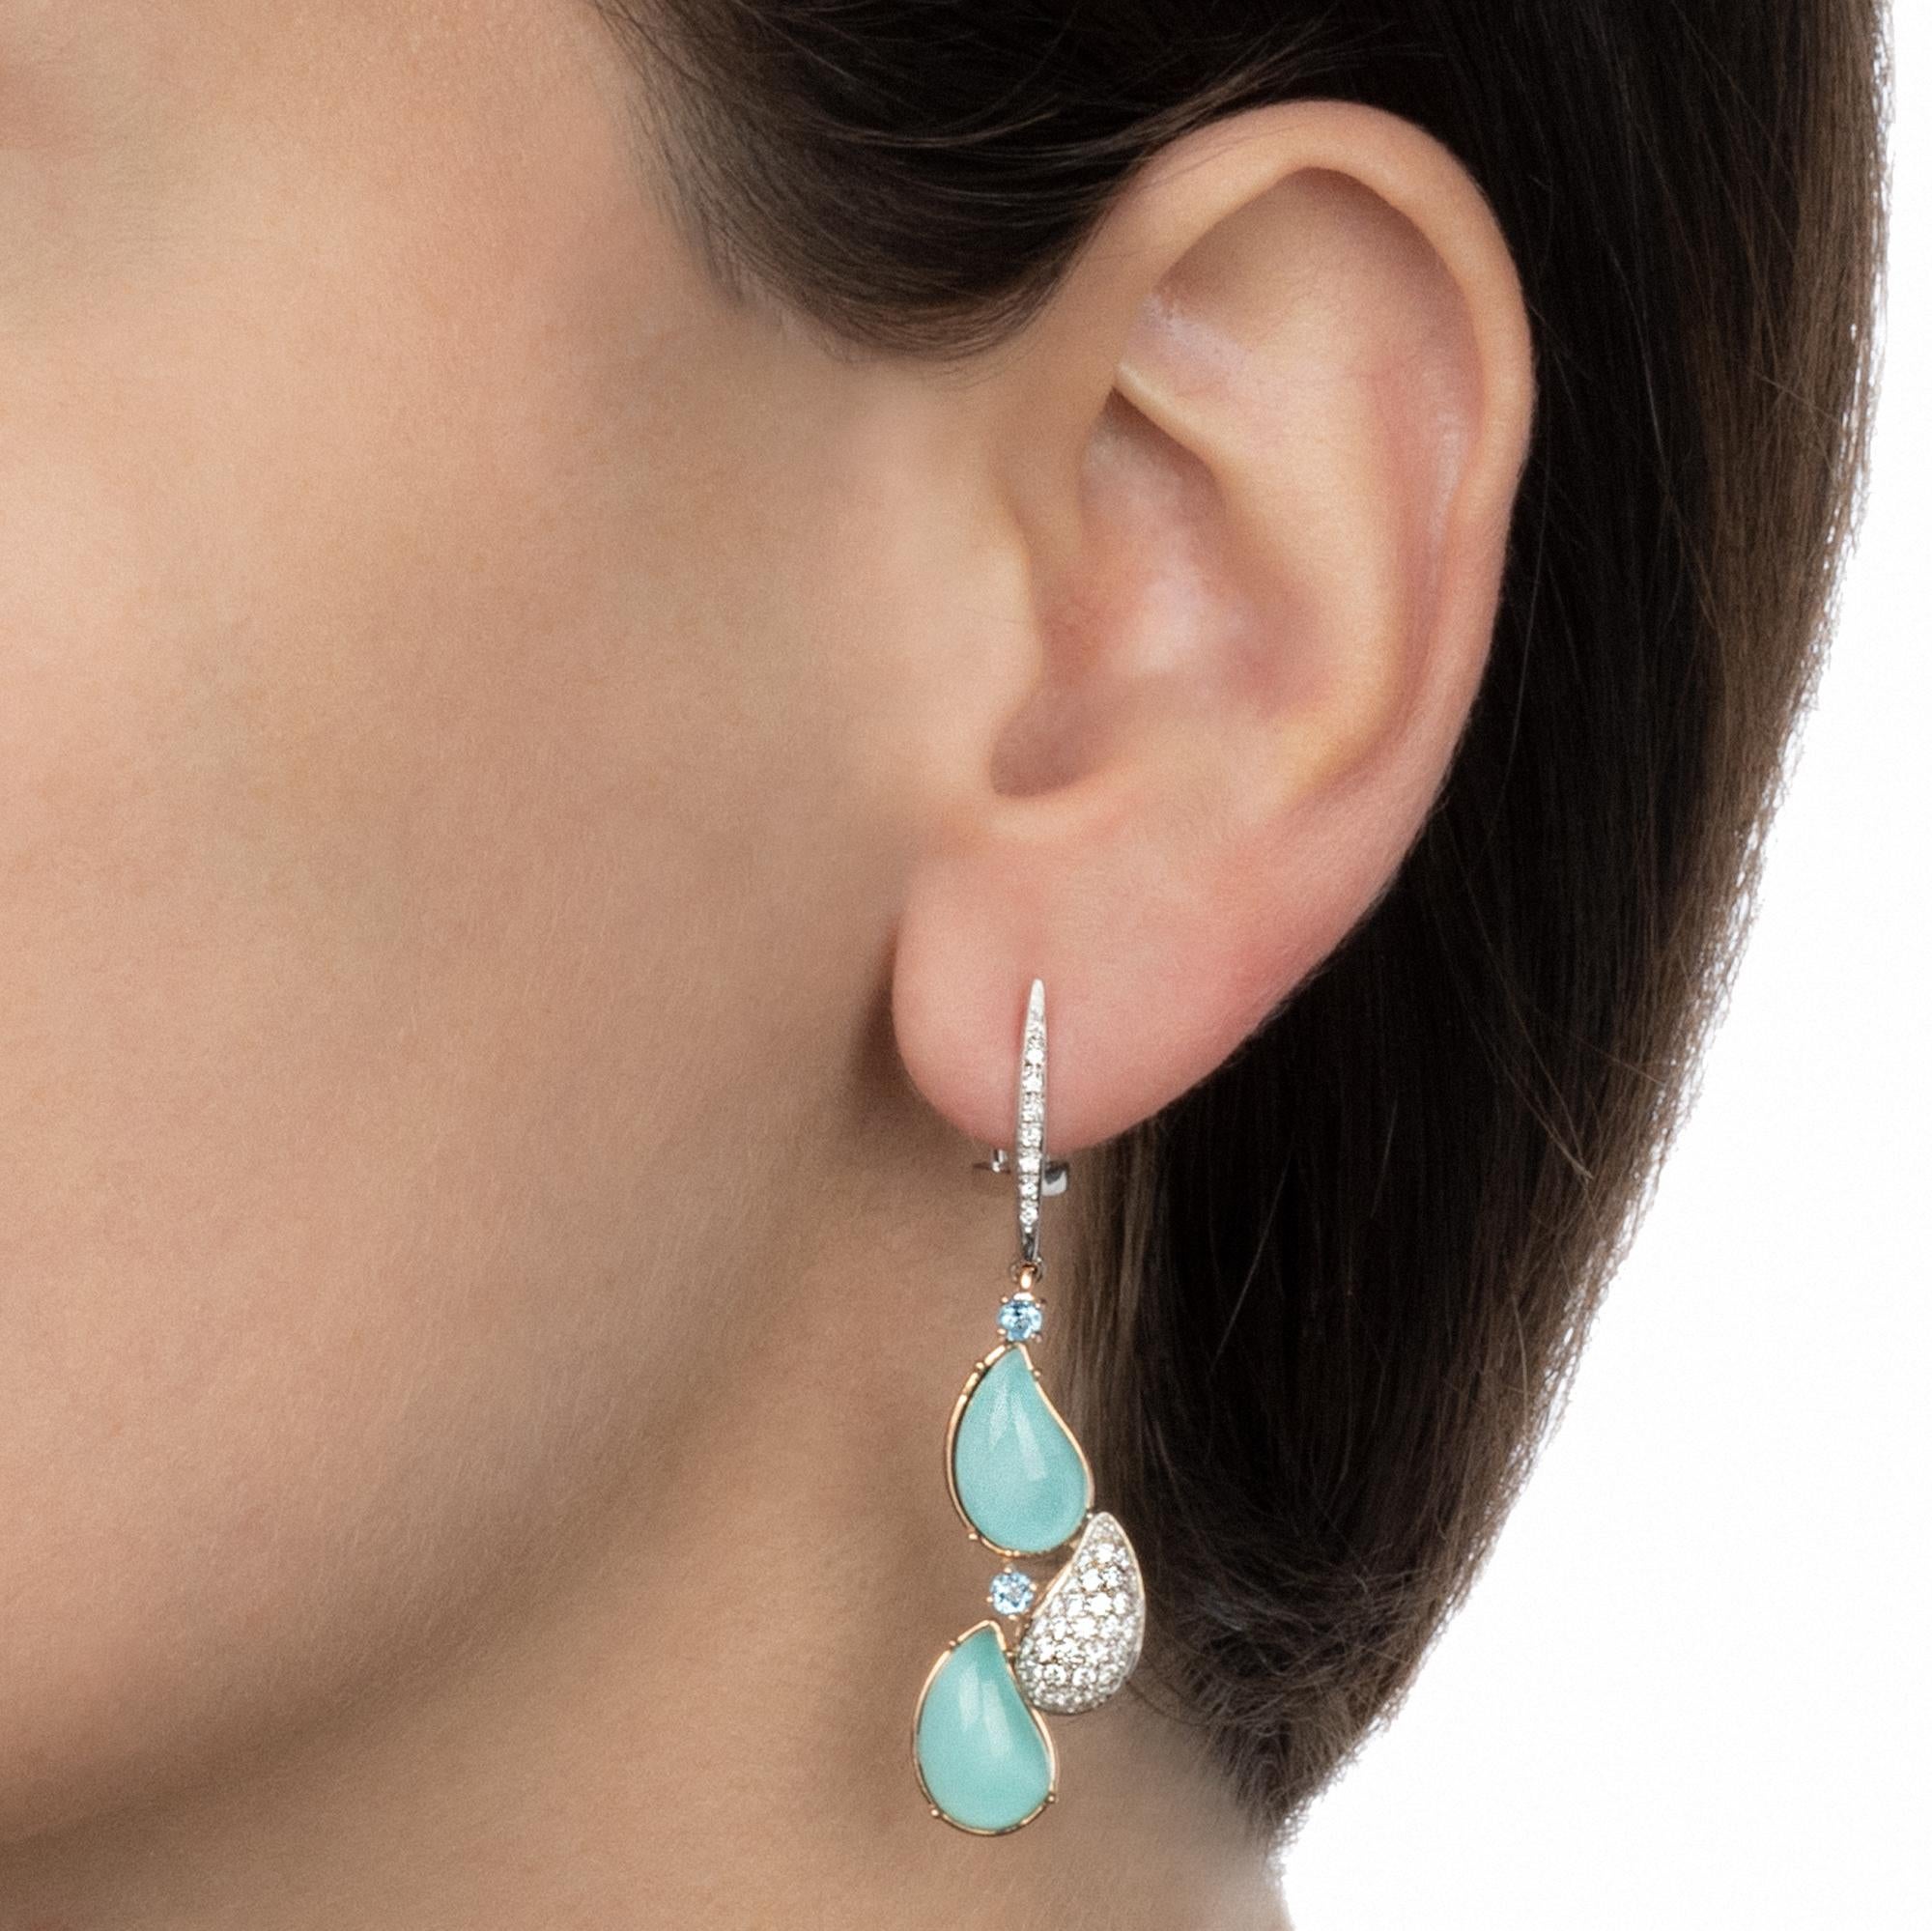 Fresh and playful like a summer memory, these earrings are classy and efferverscent at the same time. The bright light blue shade of the turquoise and topazes adds a touch of joyful elegance, while the diamonds accent add some sparkle. A set of